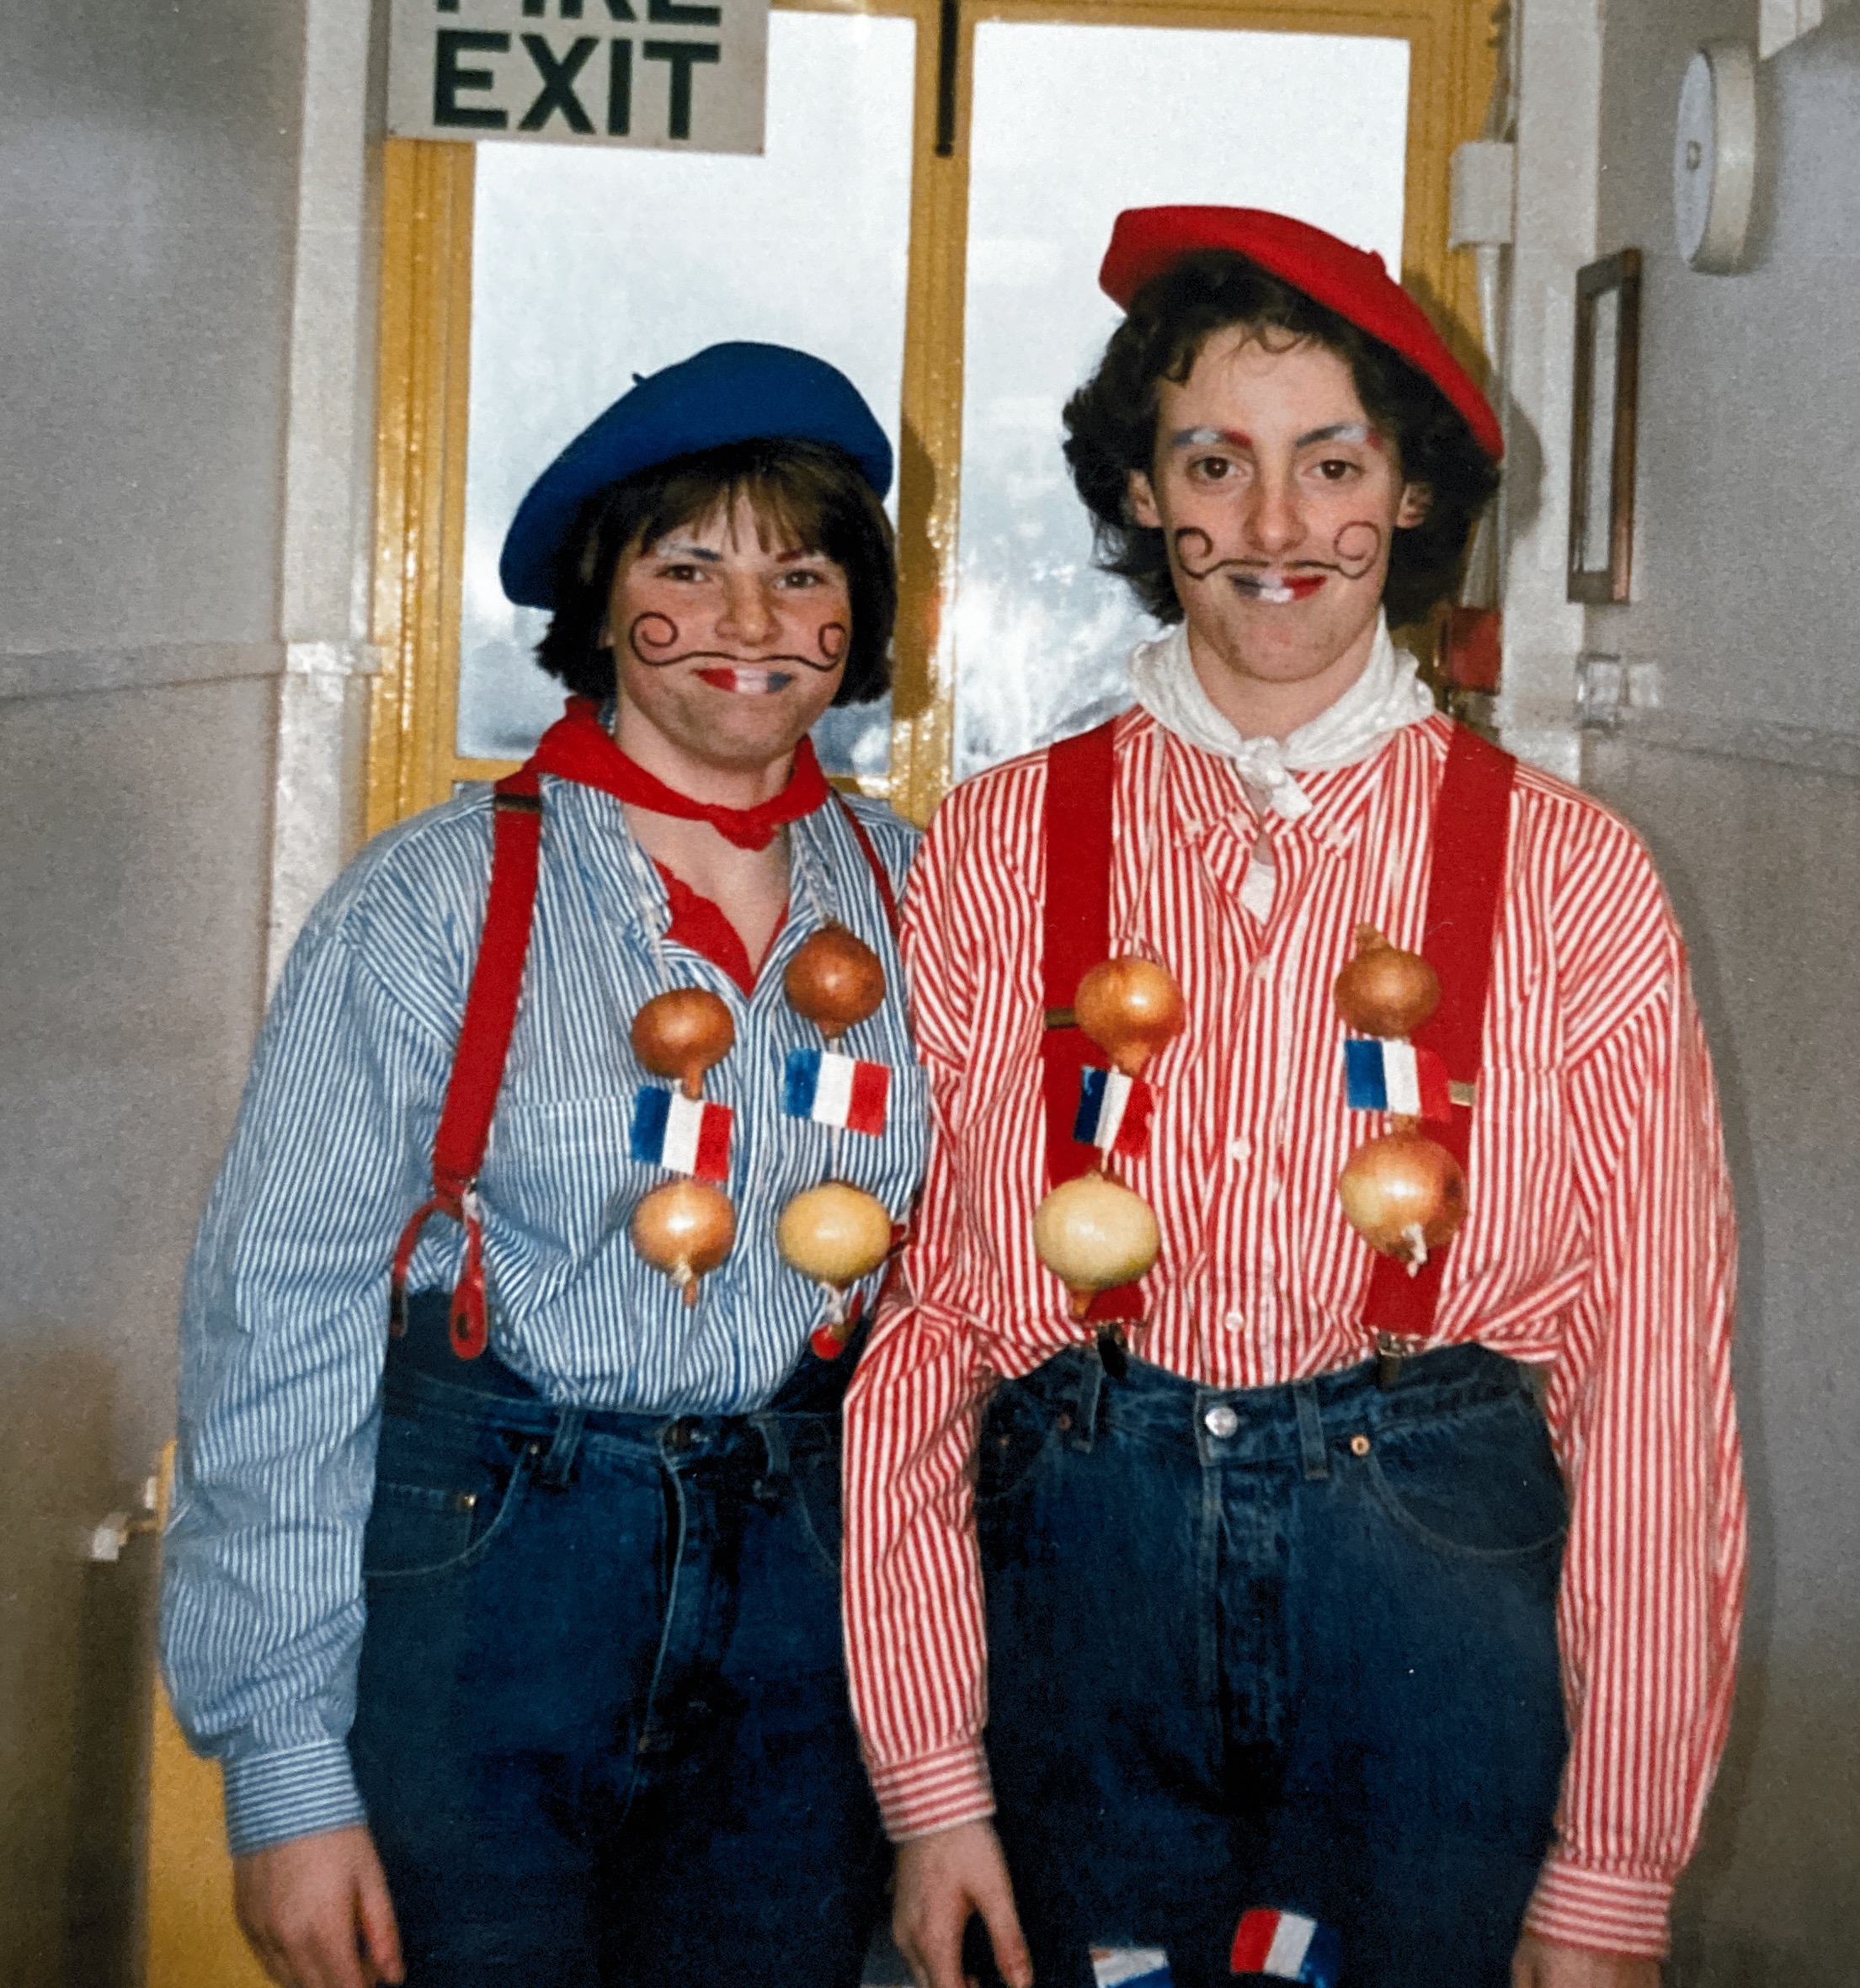 RNS Spring 1989  Red Nose Day
Nessie Haines & Lucilla Kay-Smith